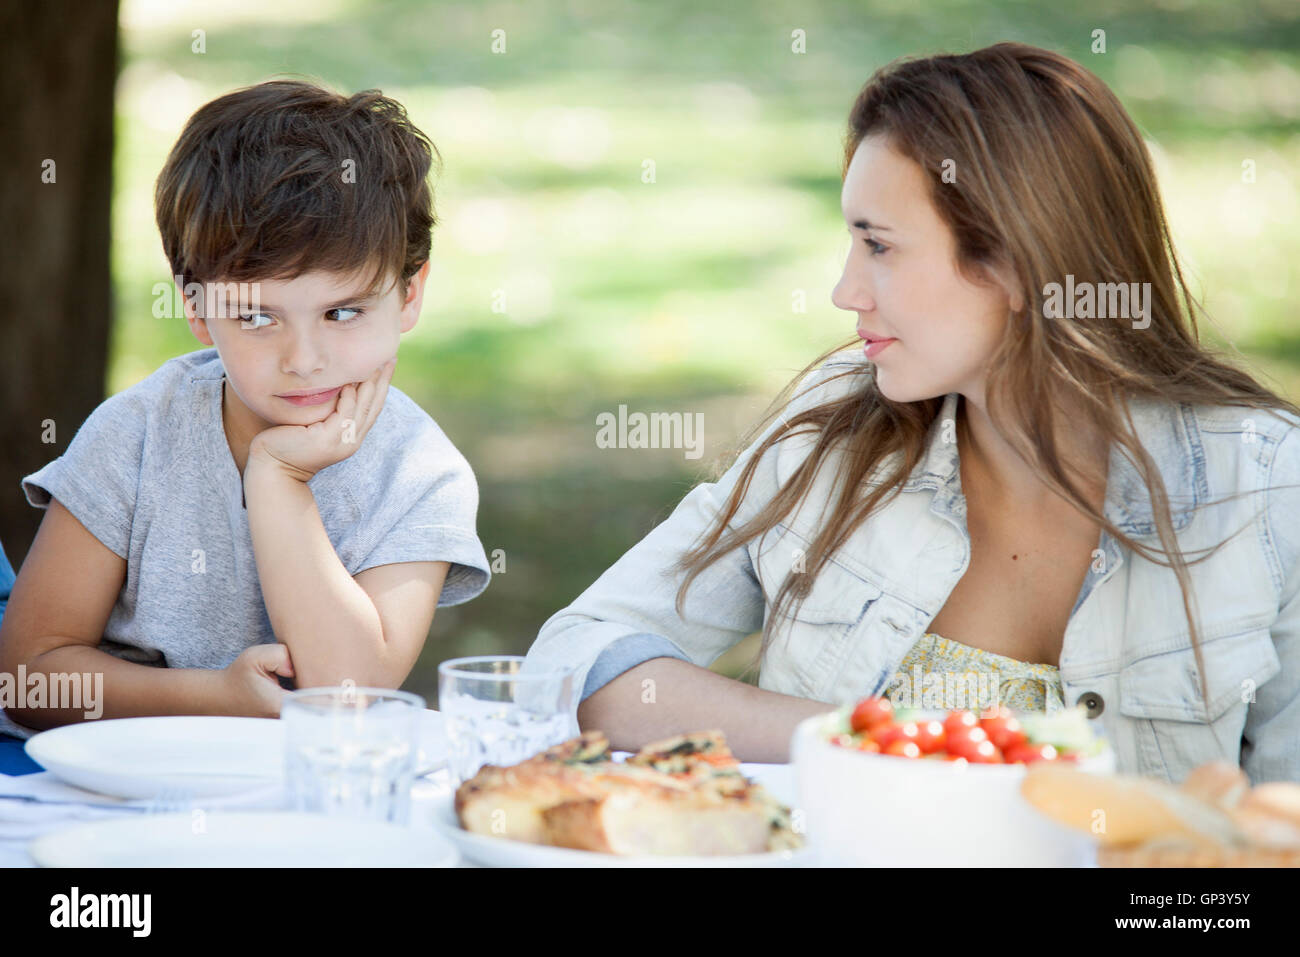 Mother disciplining disobedient child Stock Photo